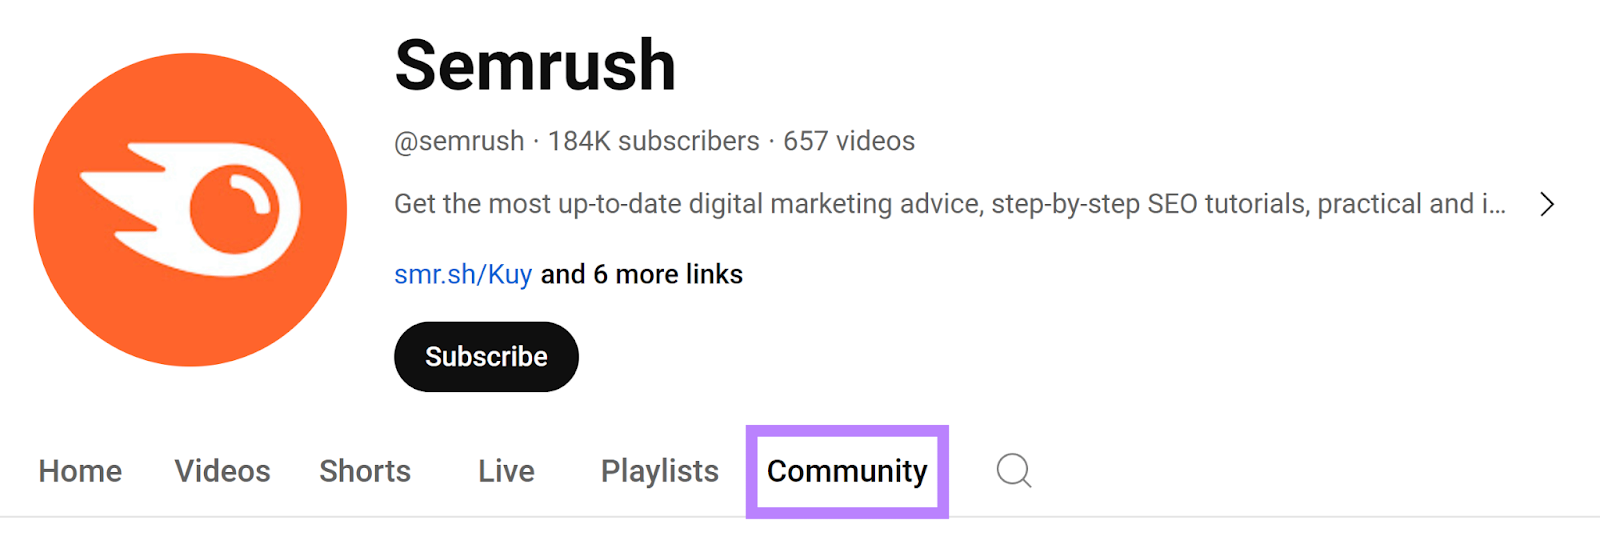 Semrush YouTube profile with Community tab selected and highlighted.